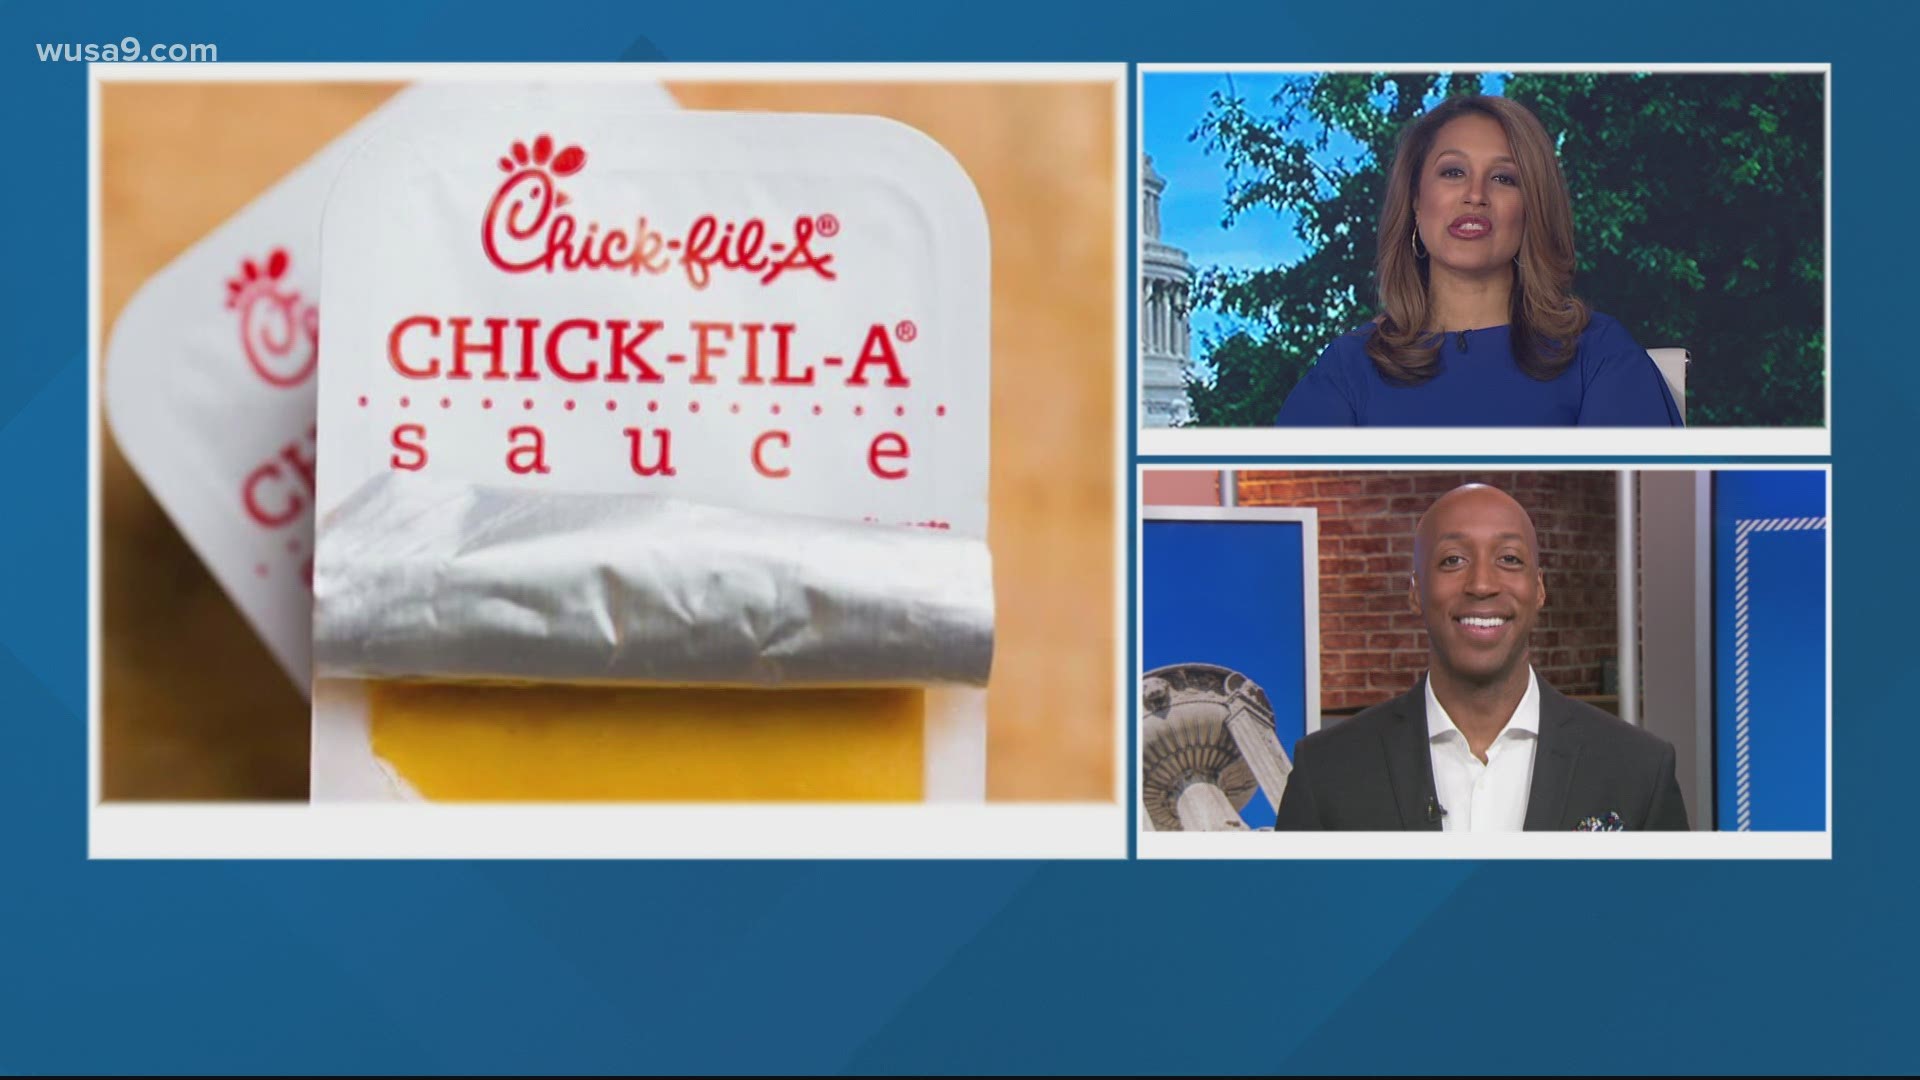 New restrictions are in place at Chick-fil-a. You can only get one sauce per meal due to a supply chain disruption that is causing a sauce shortage.